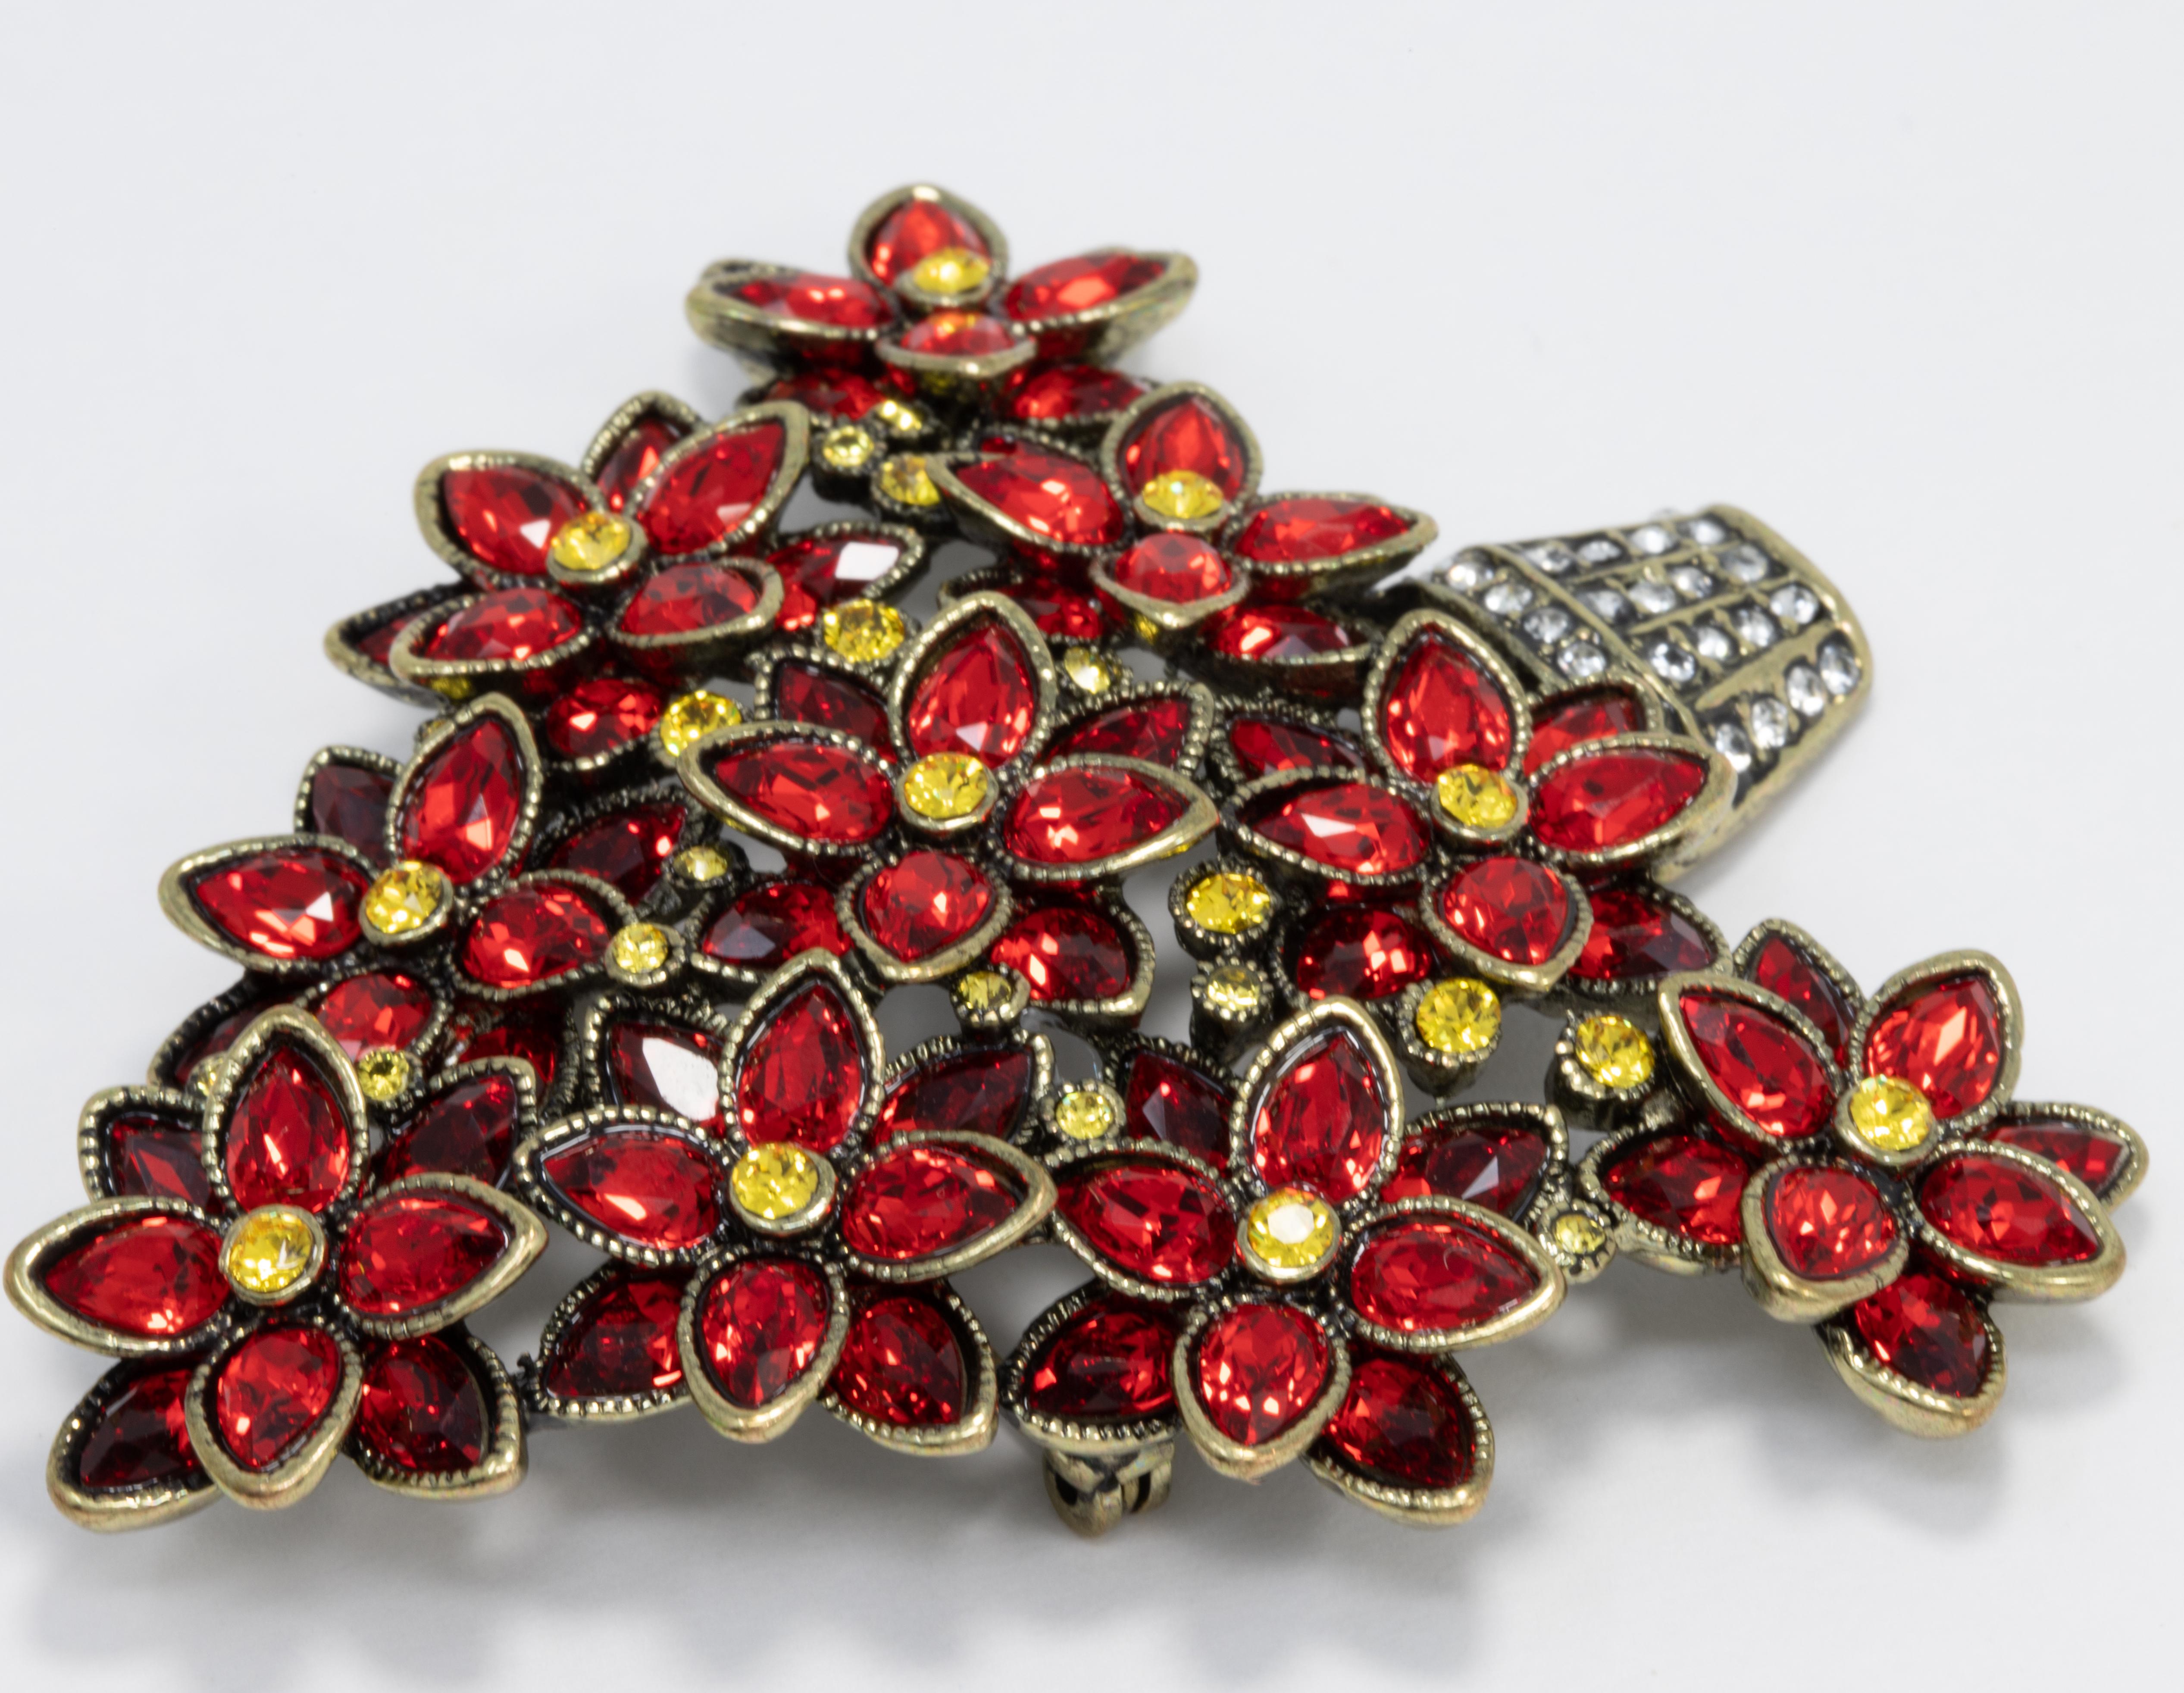 A pretty poinsettia plant decorated with siam and lemon topaz crystals by Heidi Daus. 

Exquisite brass-tone brooch setting.

Marks / hallmarks: Heidi Daus, China